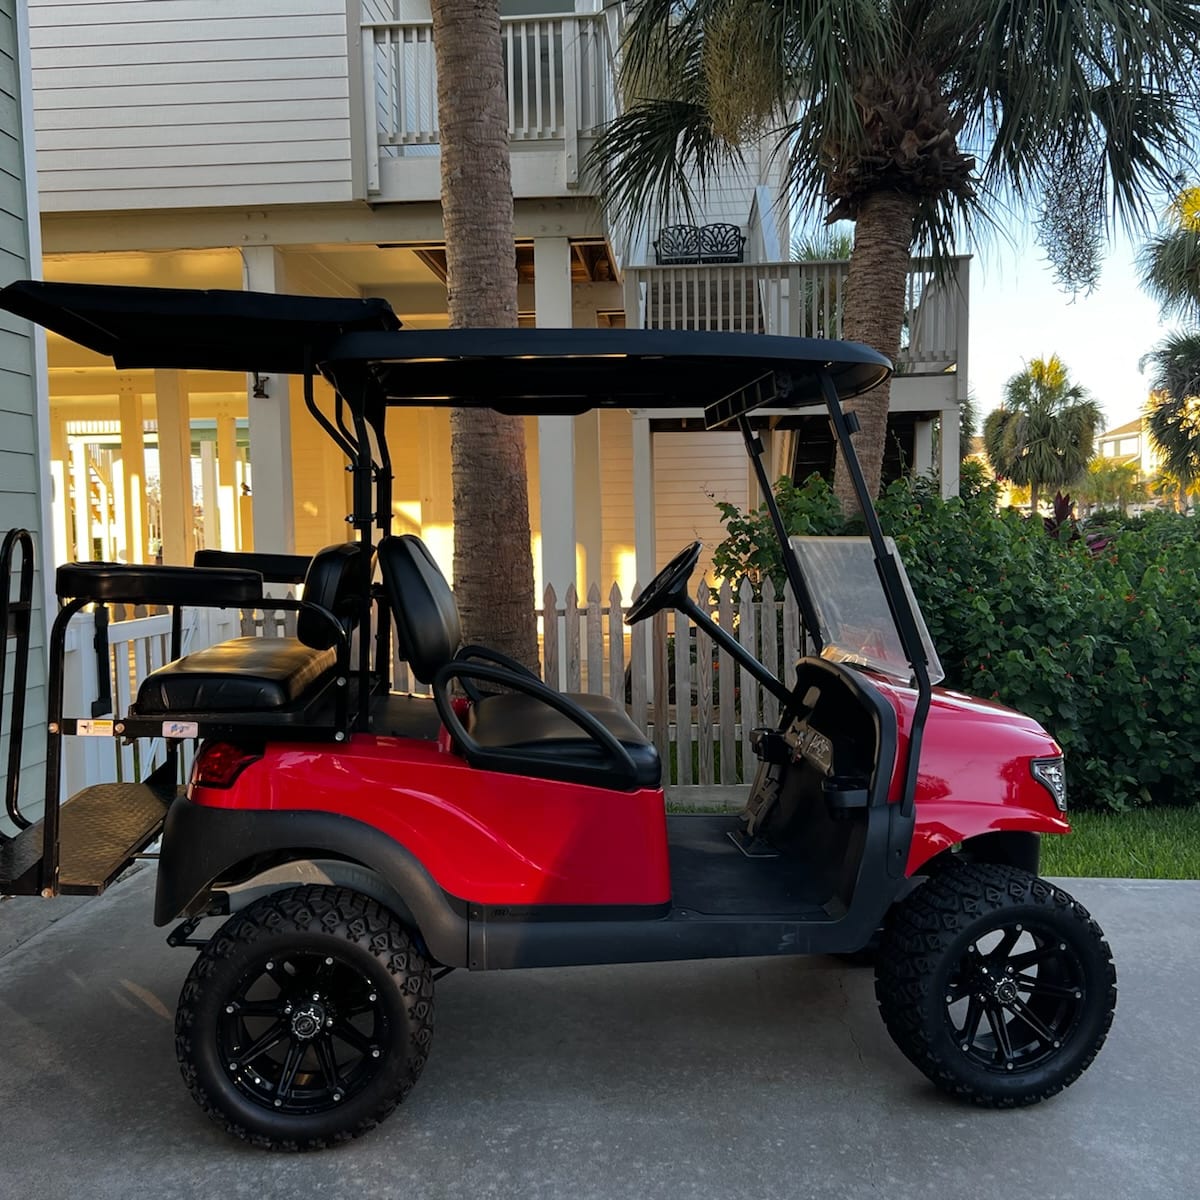 SOLD] - SOLD- Club Car - Lifted Four Seat Golf Cart - Price Reduced